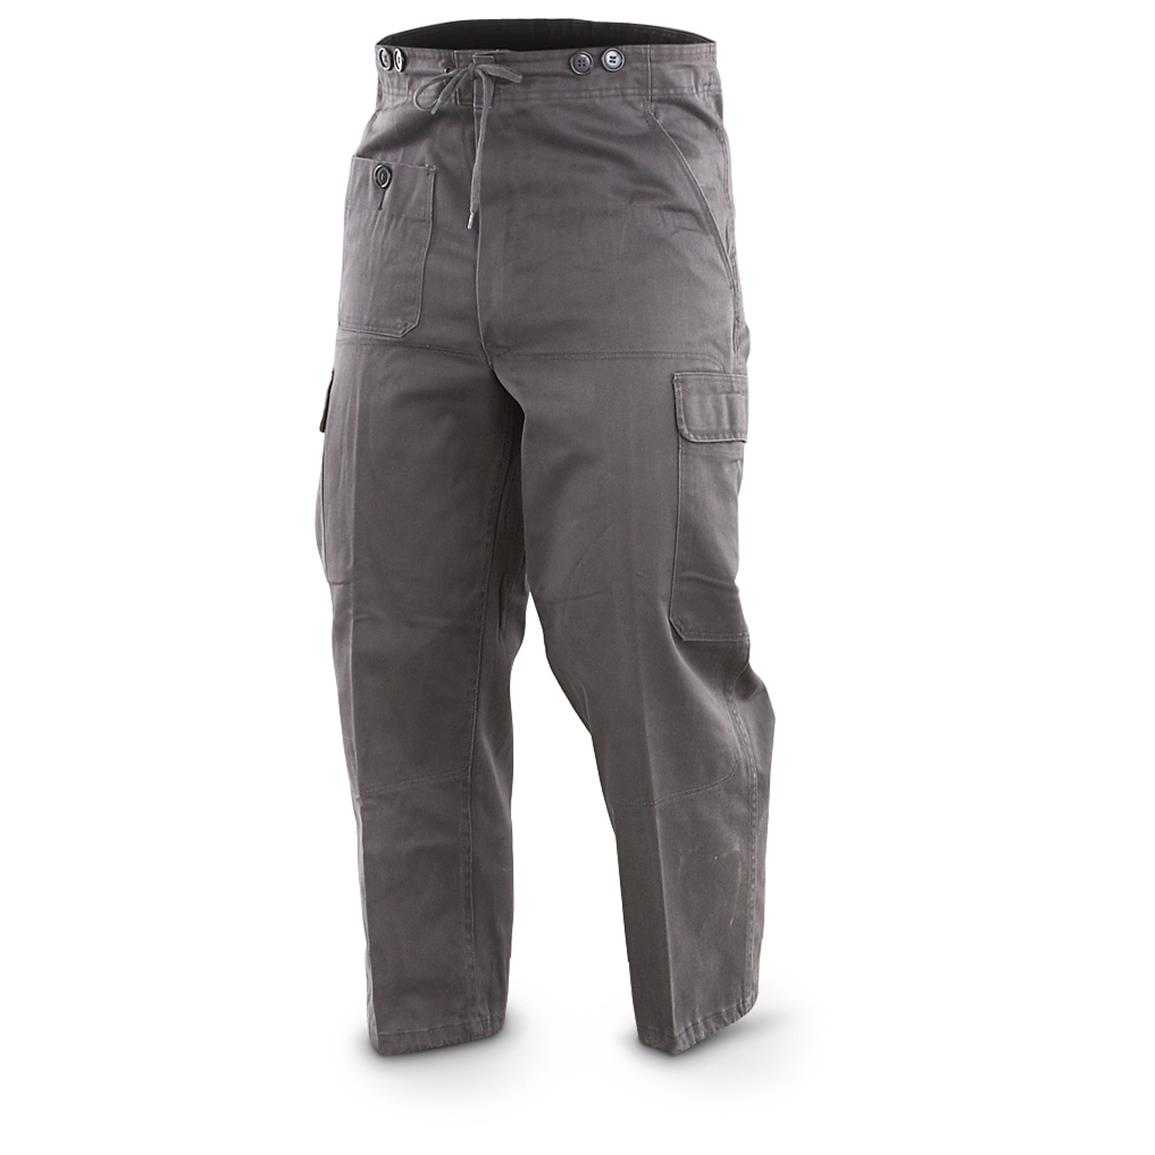 Used Danish Police Issue Combat Pants, Gray - 421475, Pants at ...